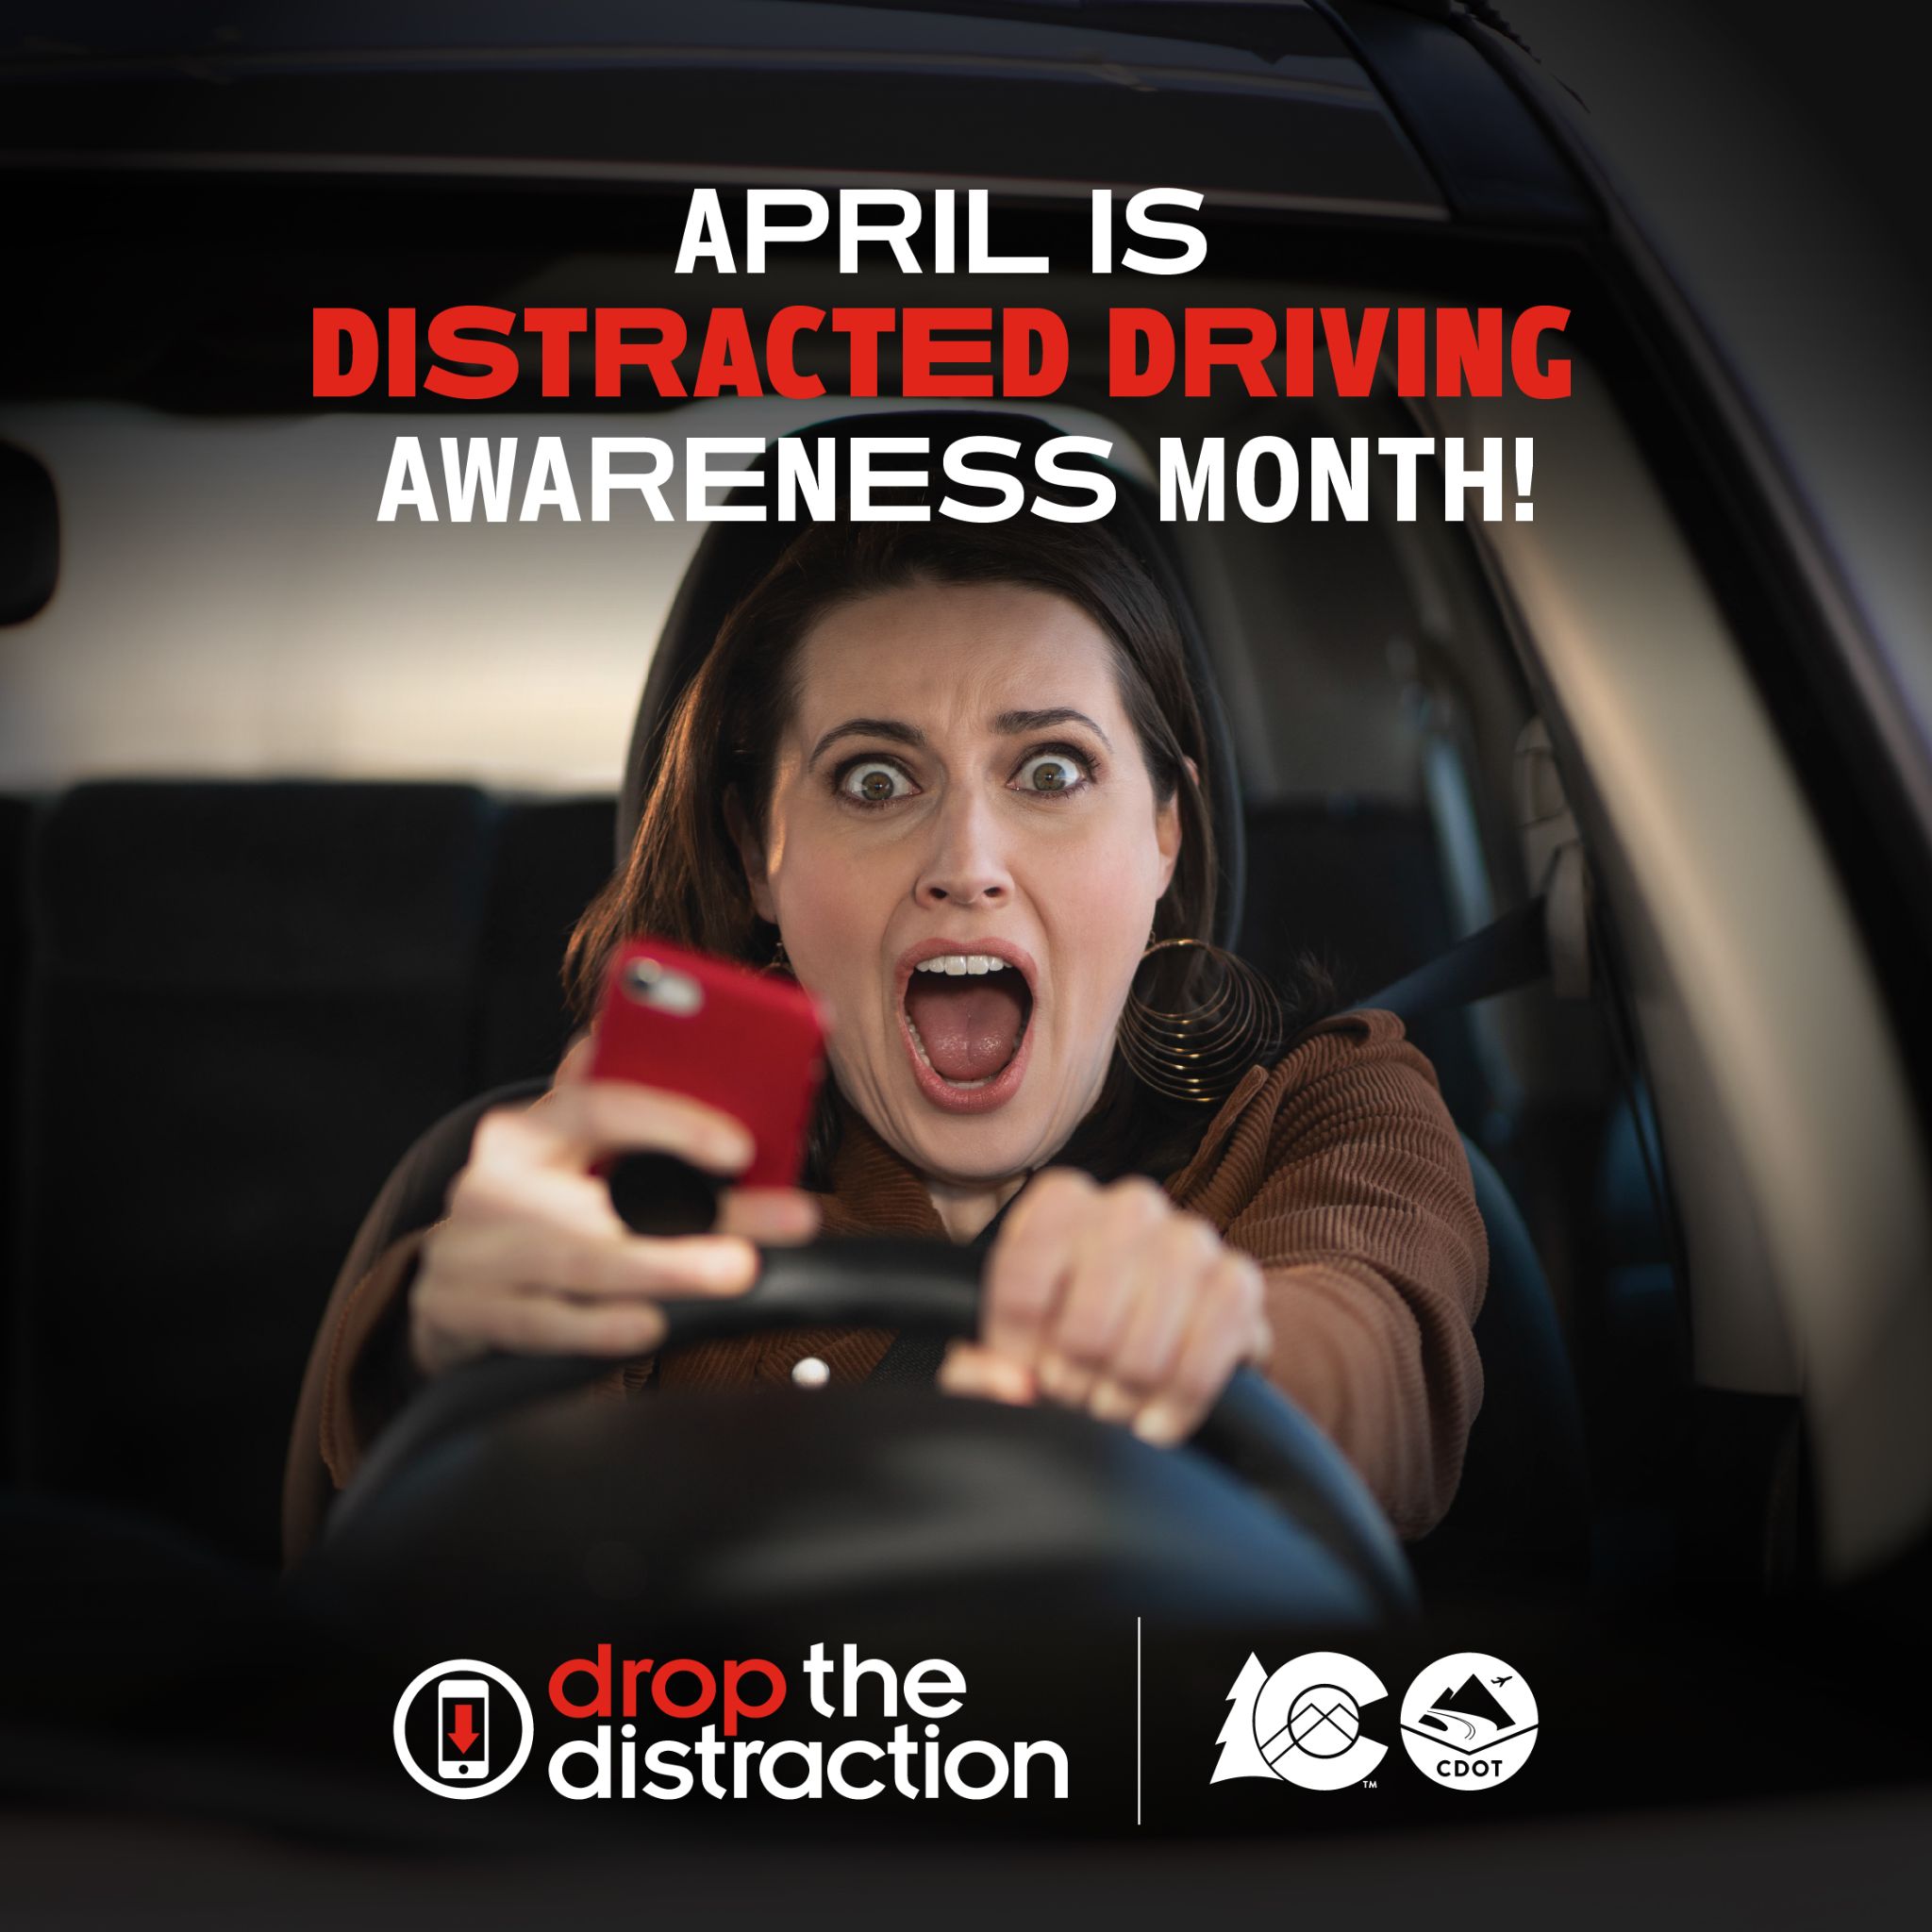 April is Distracted Driving Awareness Month graphic detail image